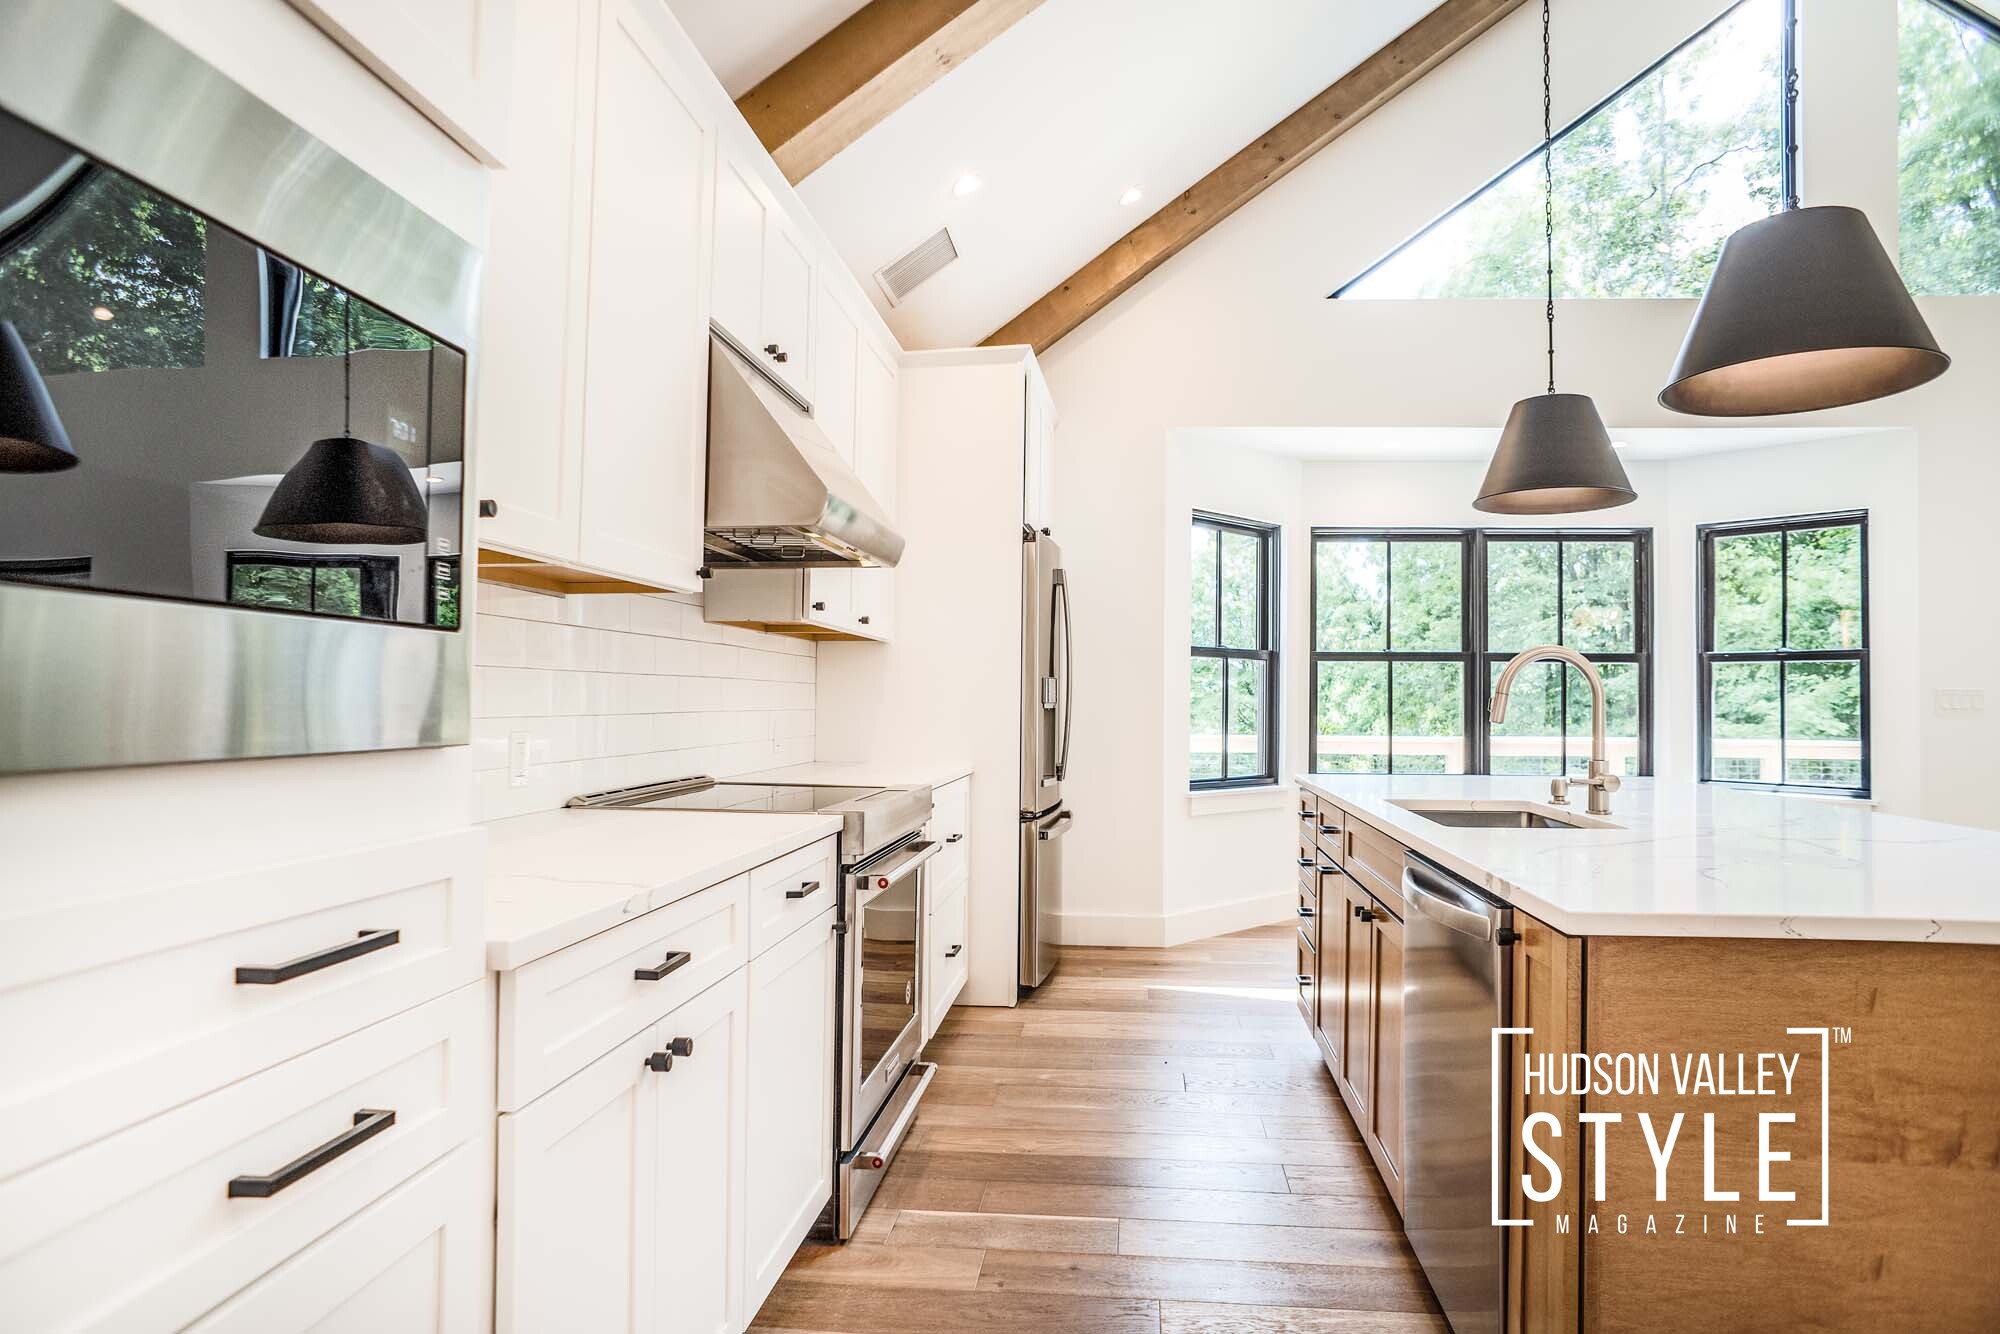 Reimagining Farmhouse Living in the Hudson Valley with a Modern Luxury Twist – Interview with Liz and Matt Elkin by Dino Alexander – Real Estate and Lifestyle Photography by Maxwell Alexander, Duncan Avenue Studios, New York